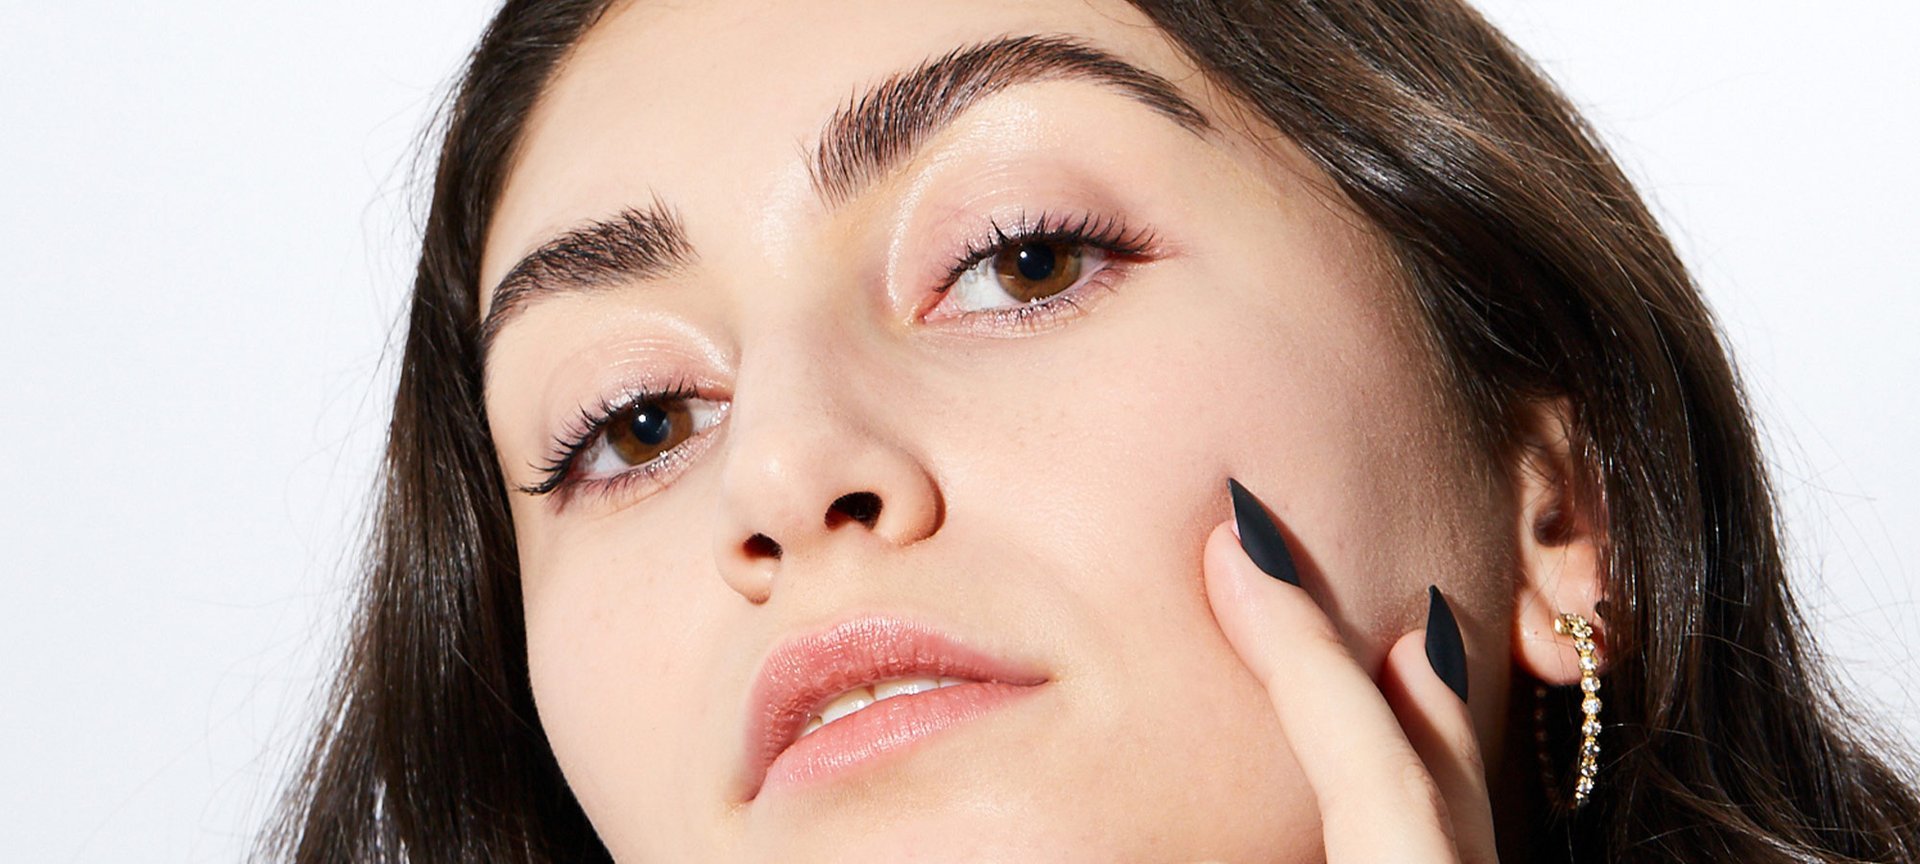 How to Try the Temporary Eyebrow Tattoos Trend - L'Oréal Paris